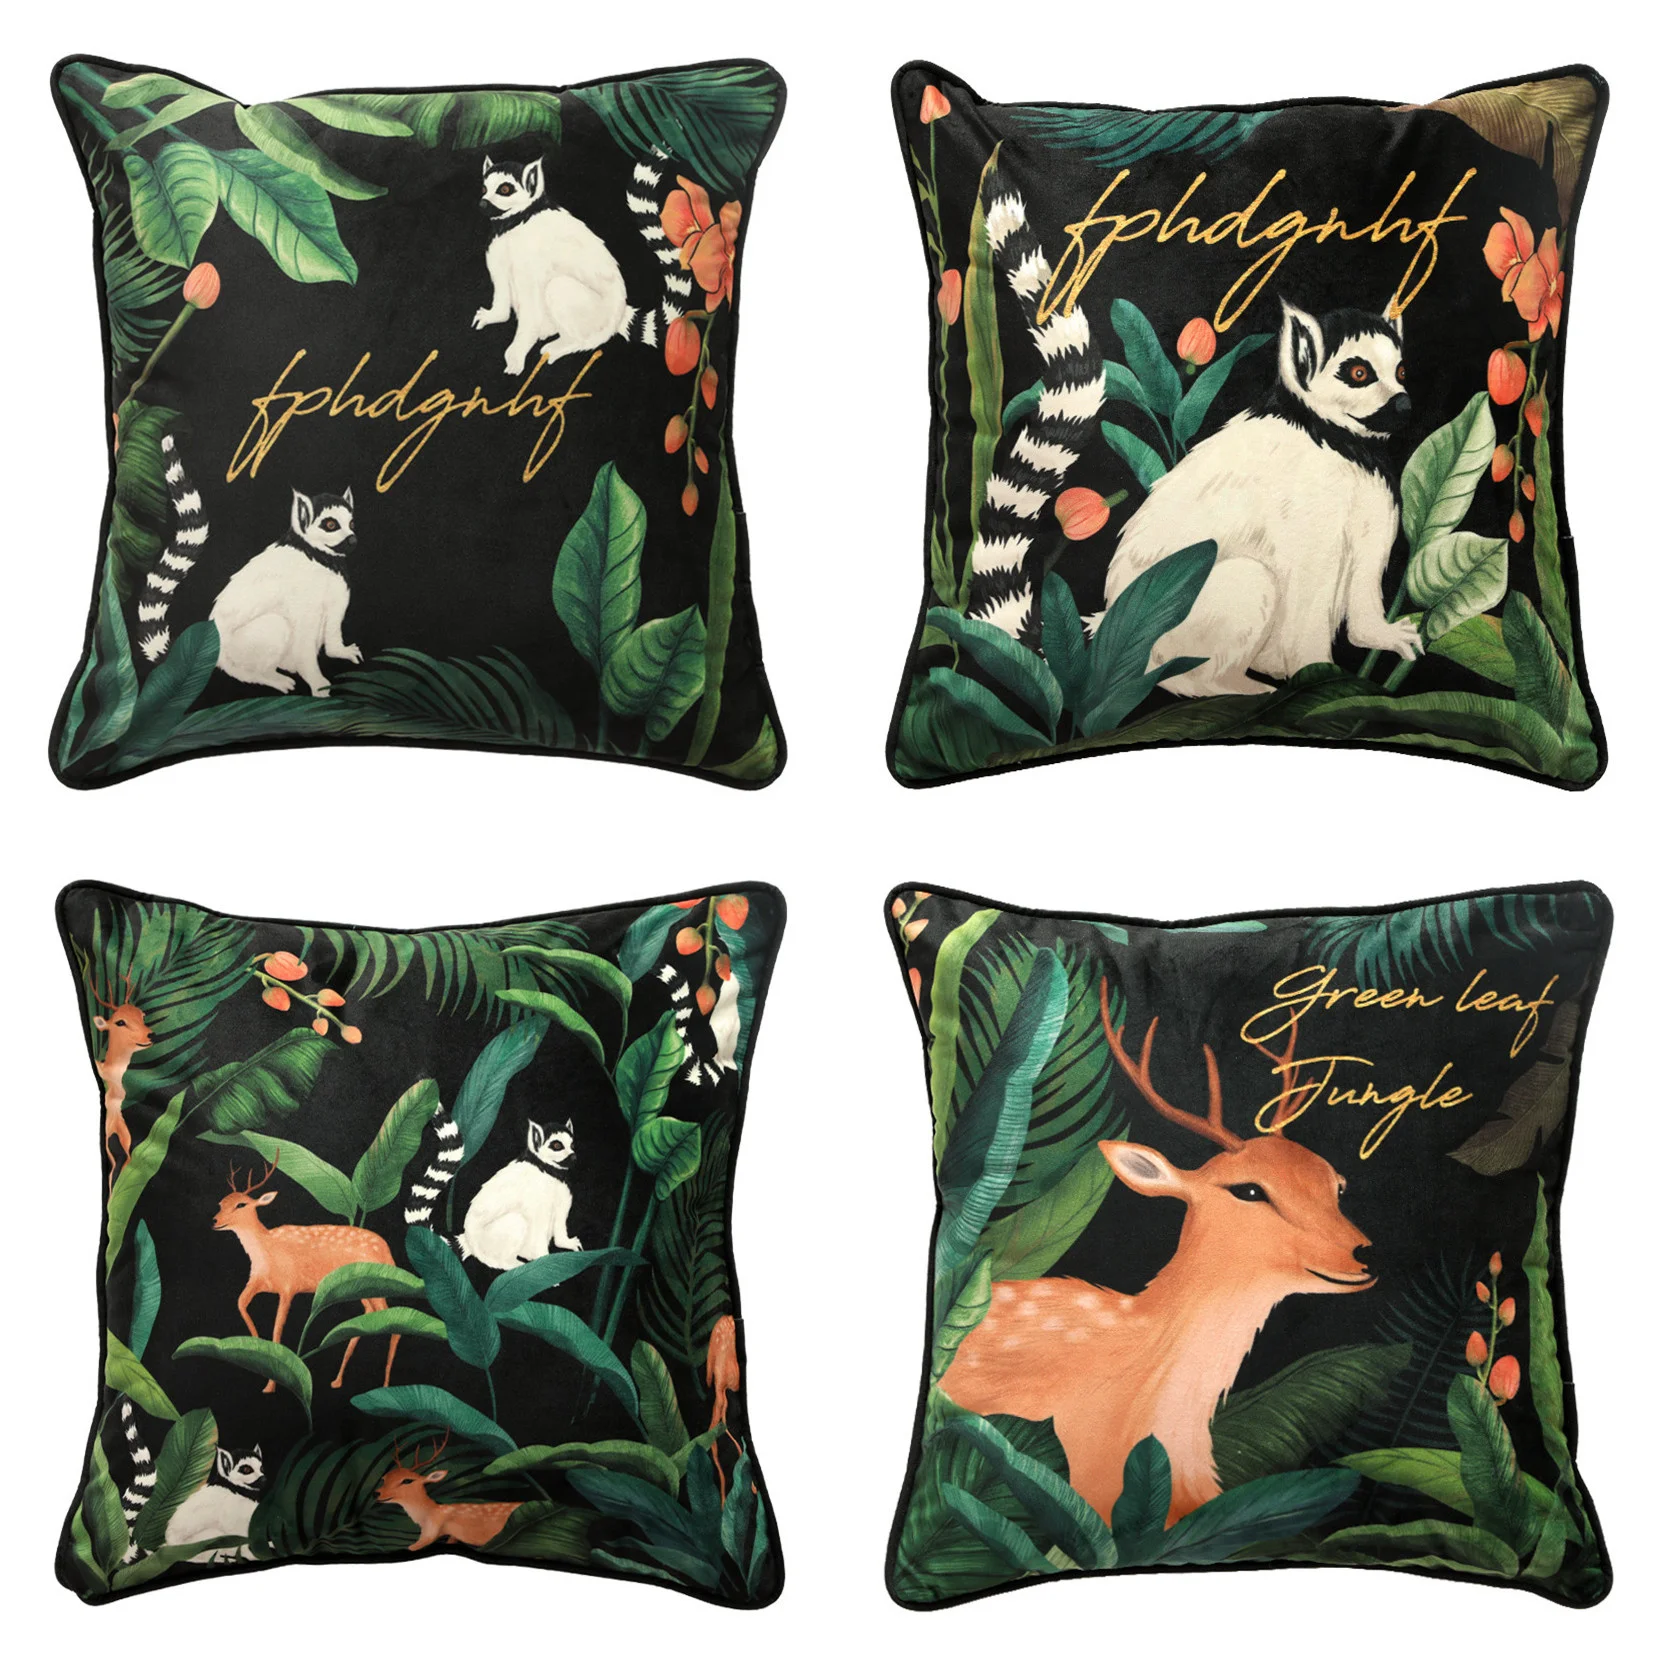 

Tropical Rainforest Cushion Cover Deer Monkey Print Pillow Case Home Bed Room Decorative 45x45cm Green Jungle Forest Funda Cojin